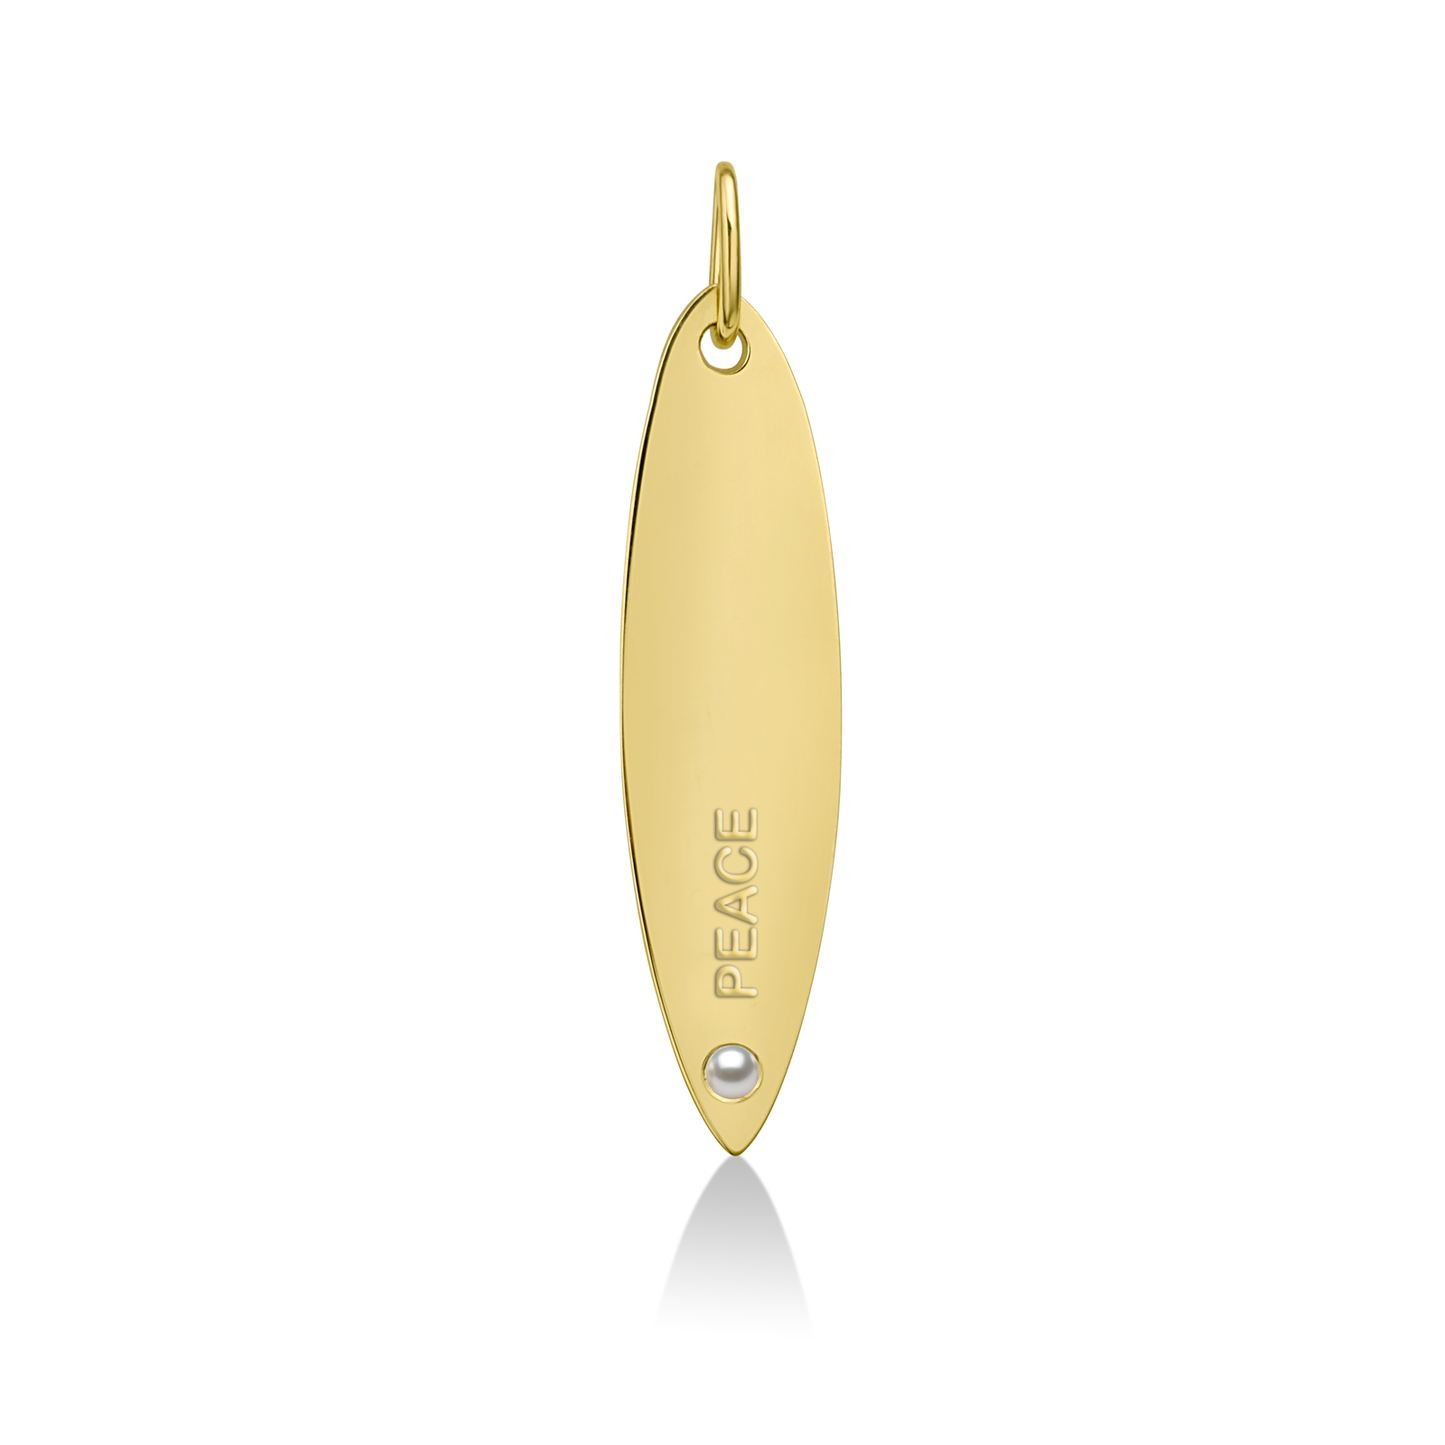 14k gold surfboard charm lock with PEACE engraved and pearl